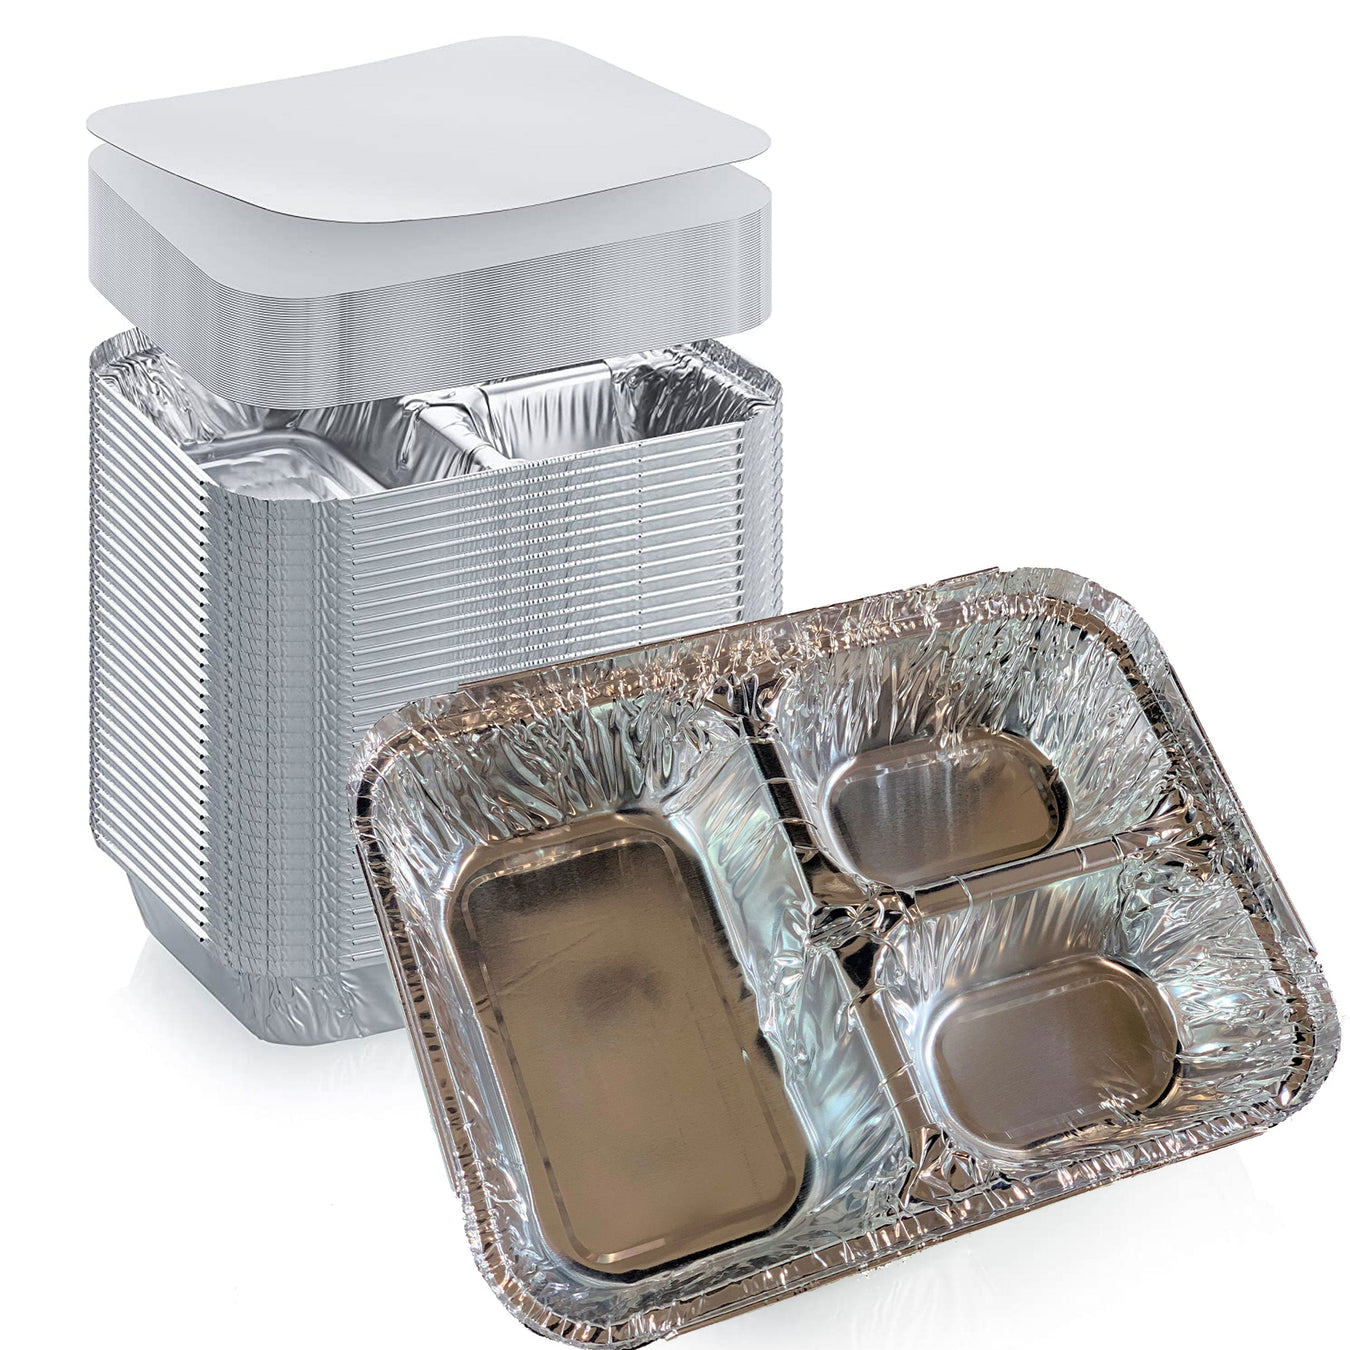 Foil Take-out Containers